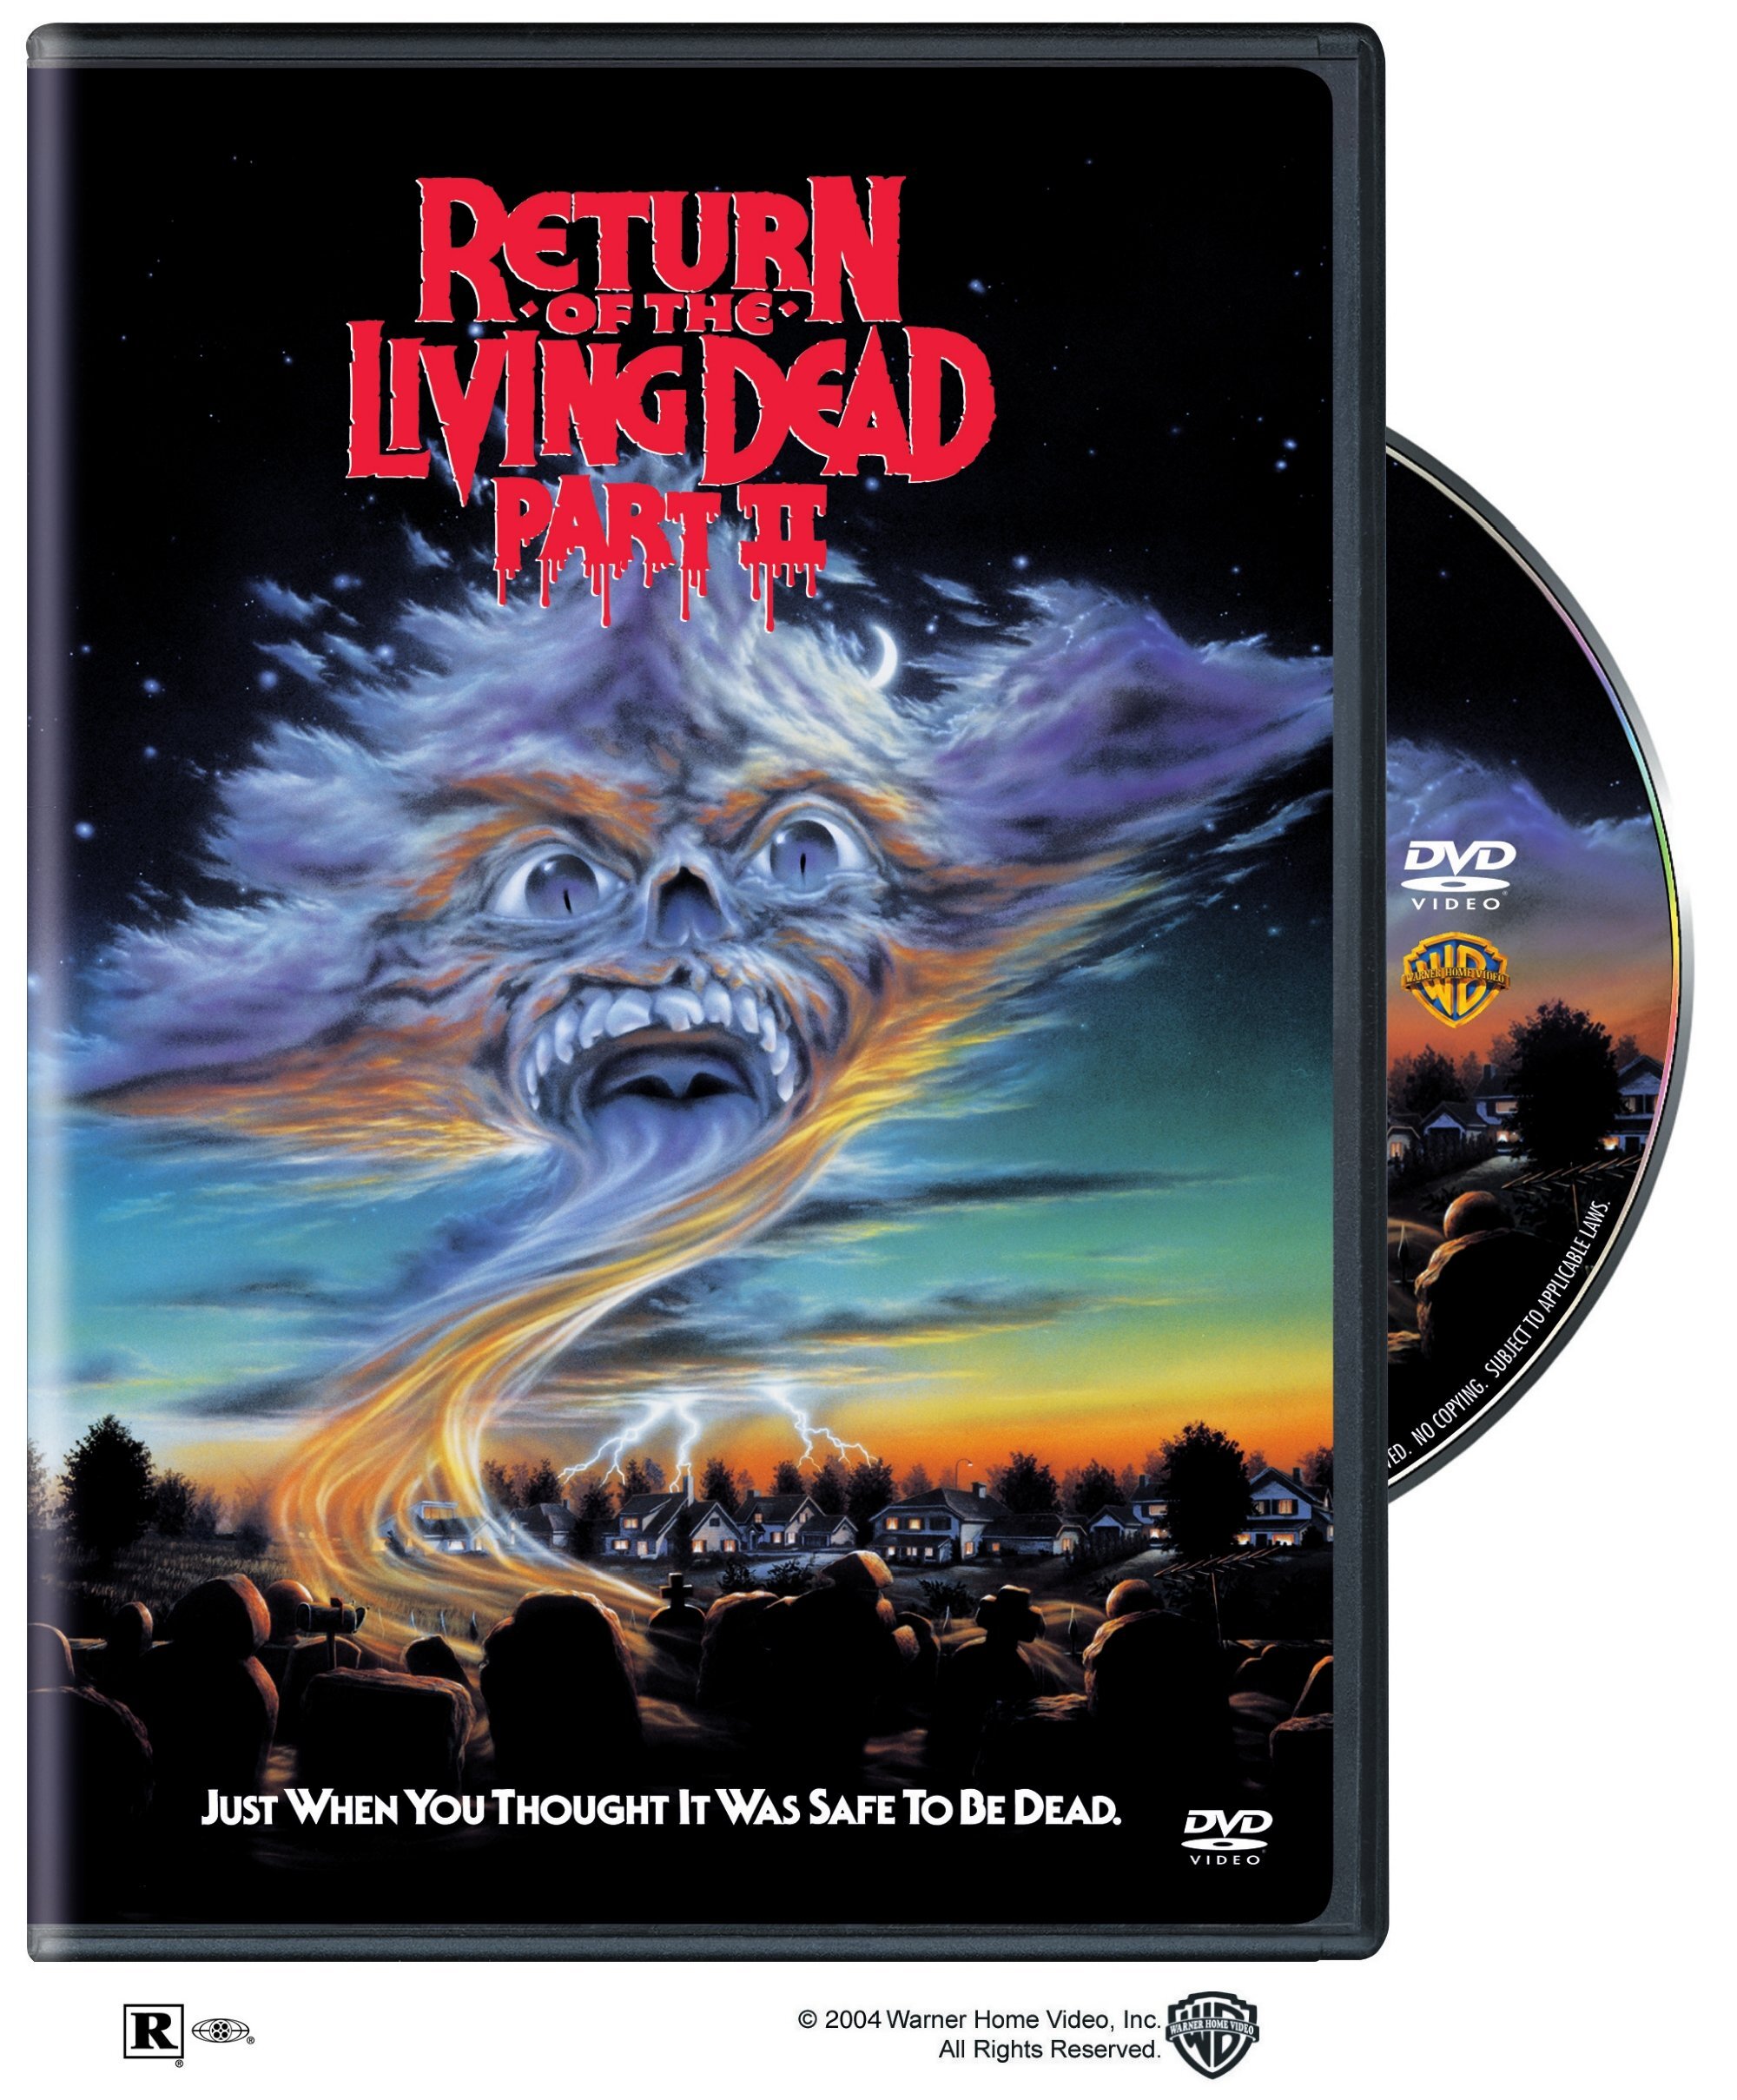 Return Of The Living Dead 2 - DVD [ 1987 ]  - Horror Movies On DVD - Movies On GRUV